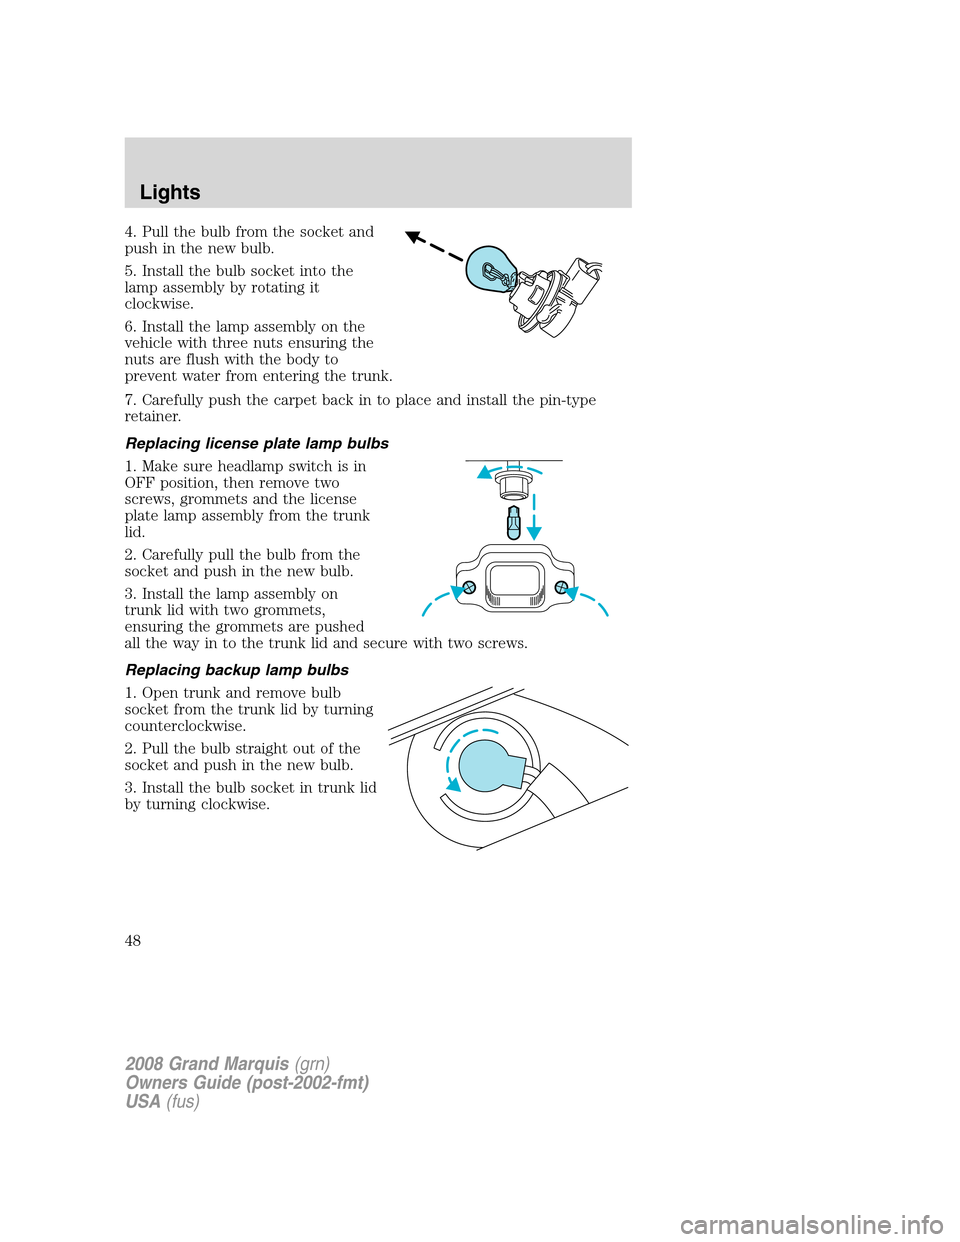 Mercury Grand Marquis 2008  Owners Manuals 4. Pull the bulb from the socket and
push in the new bulb.
5. Install the bulb socket into the
lamp assembly by rotating it
clockwise.
6. Install the lamp assembly on the
vehicle with three nuts ensur